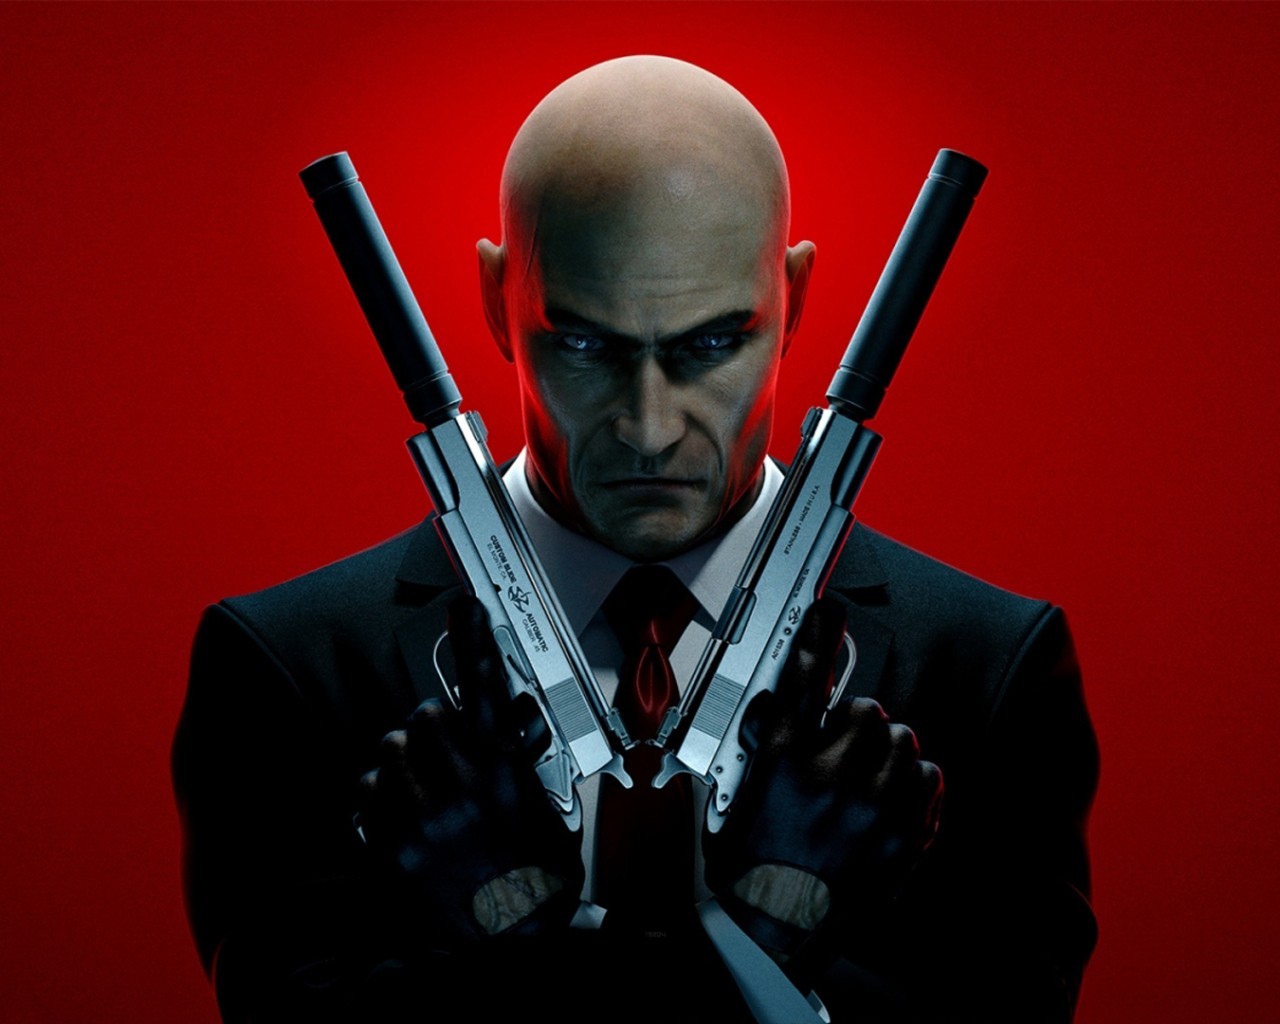 22681 download wallpaper games, hitman screensavers and pictures for free